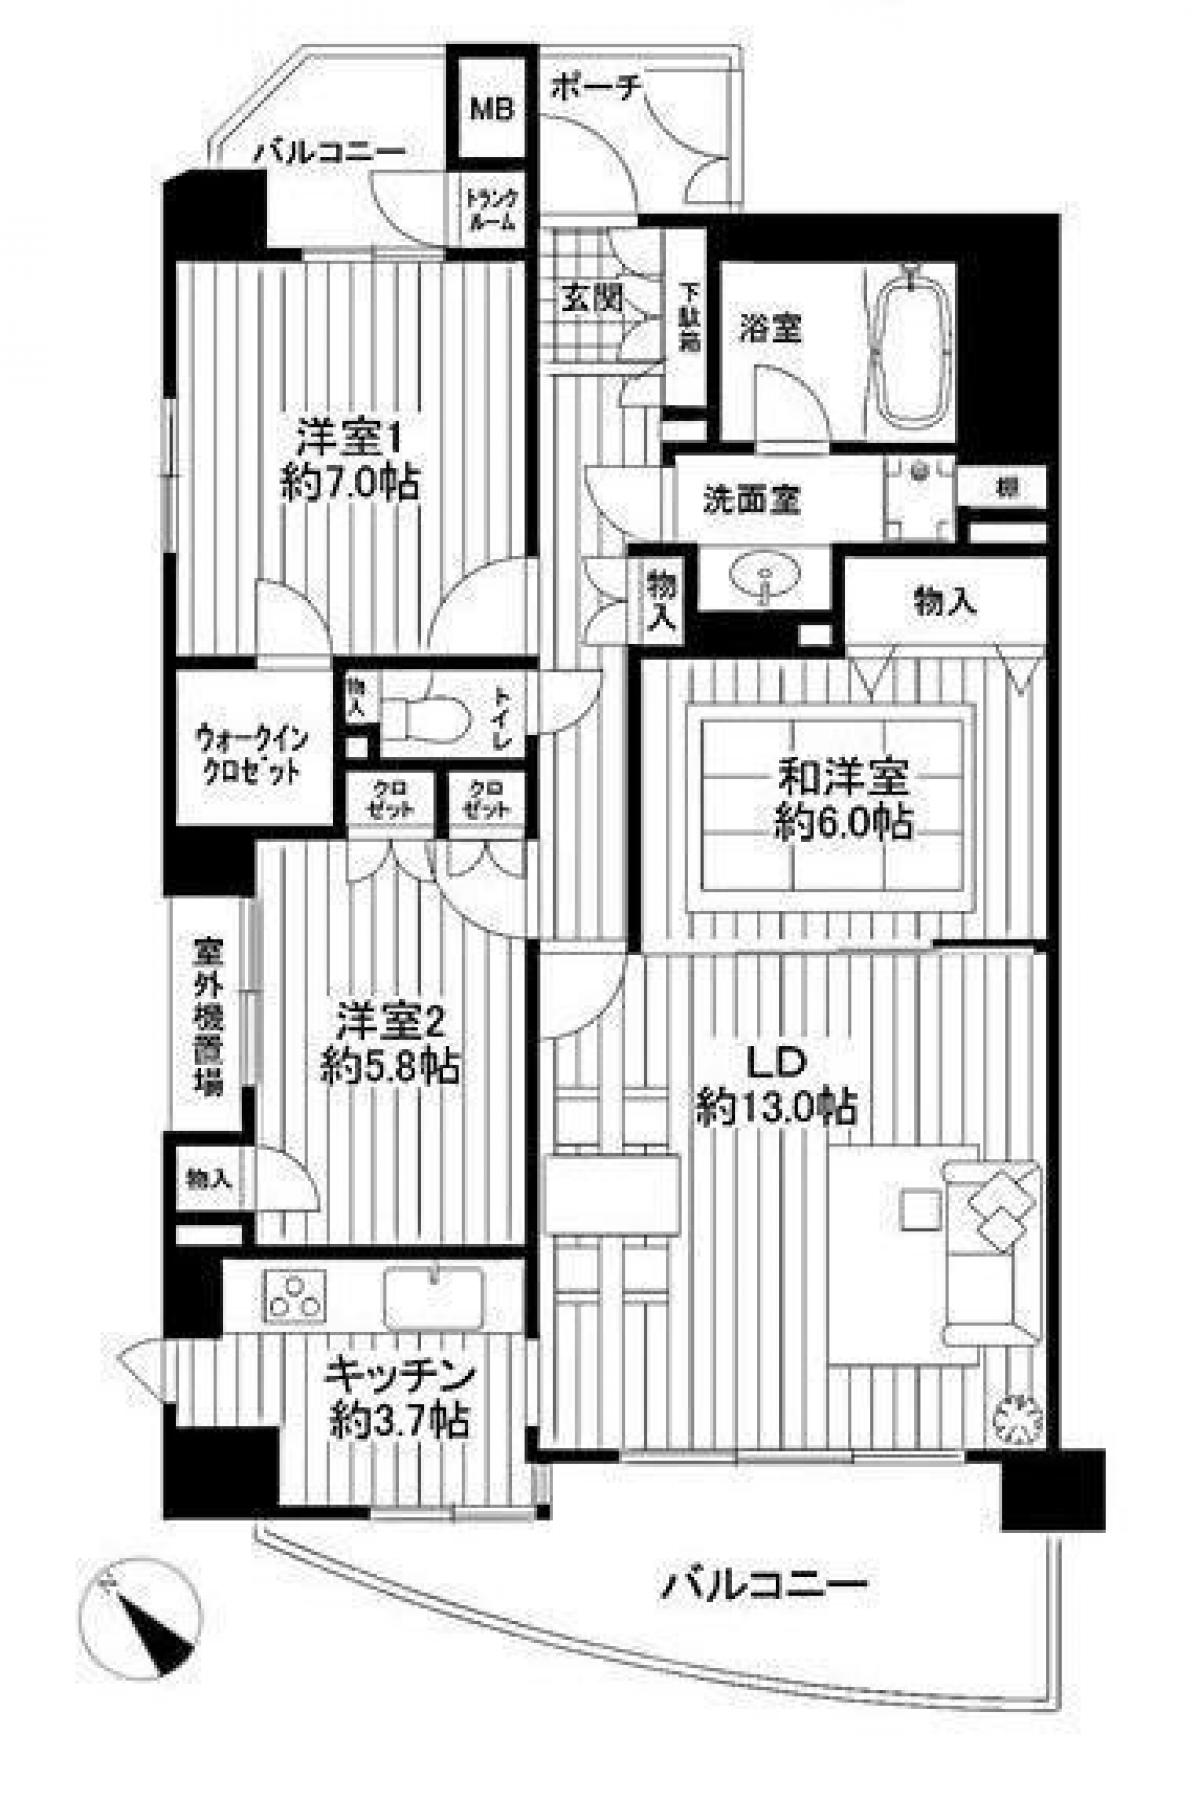 Picture of Apartment For Sale in Tachikawa Shi, Tokyo, Japan